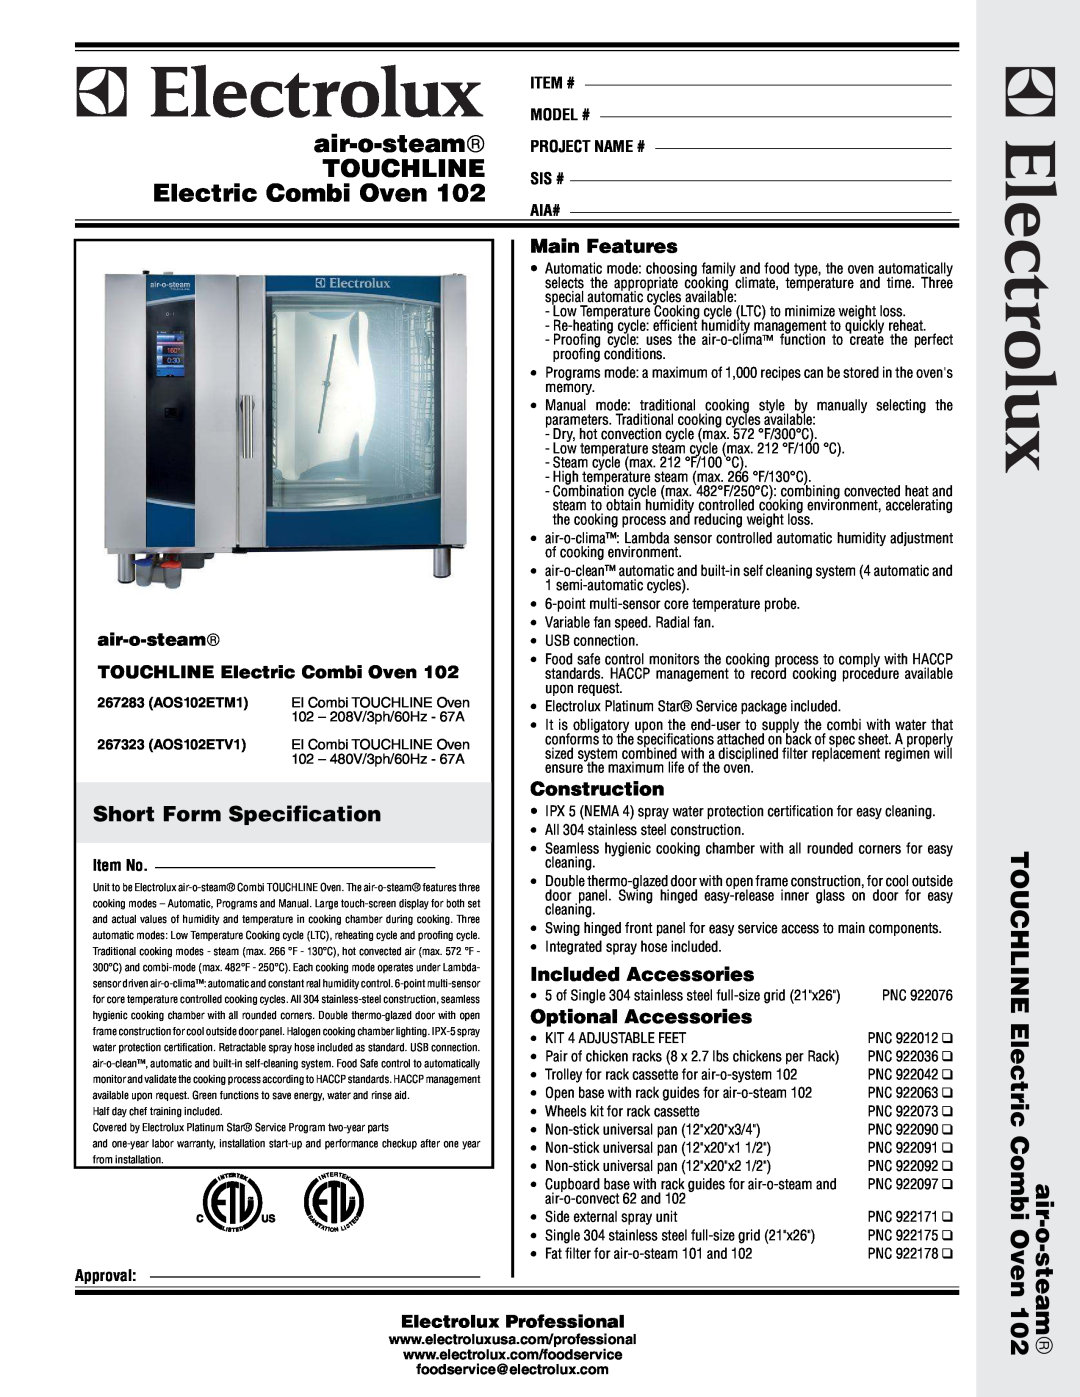 Electrolux 267283 (AOS102ETM1) warranty Short Form Specification, air-o-steamâ, TOUCHLINE Electric Combi Oven, Touchline 